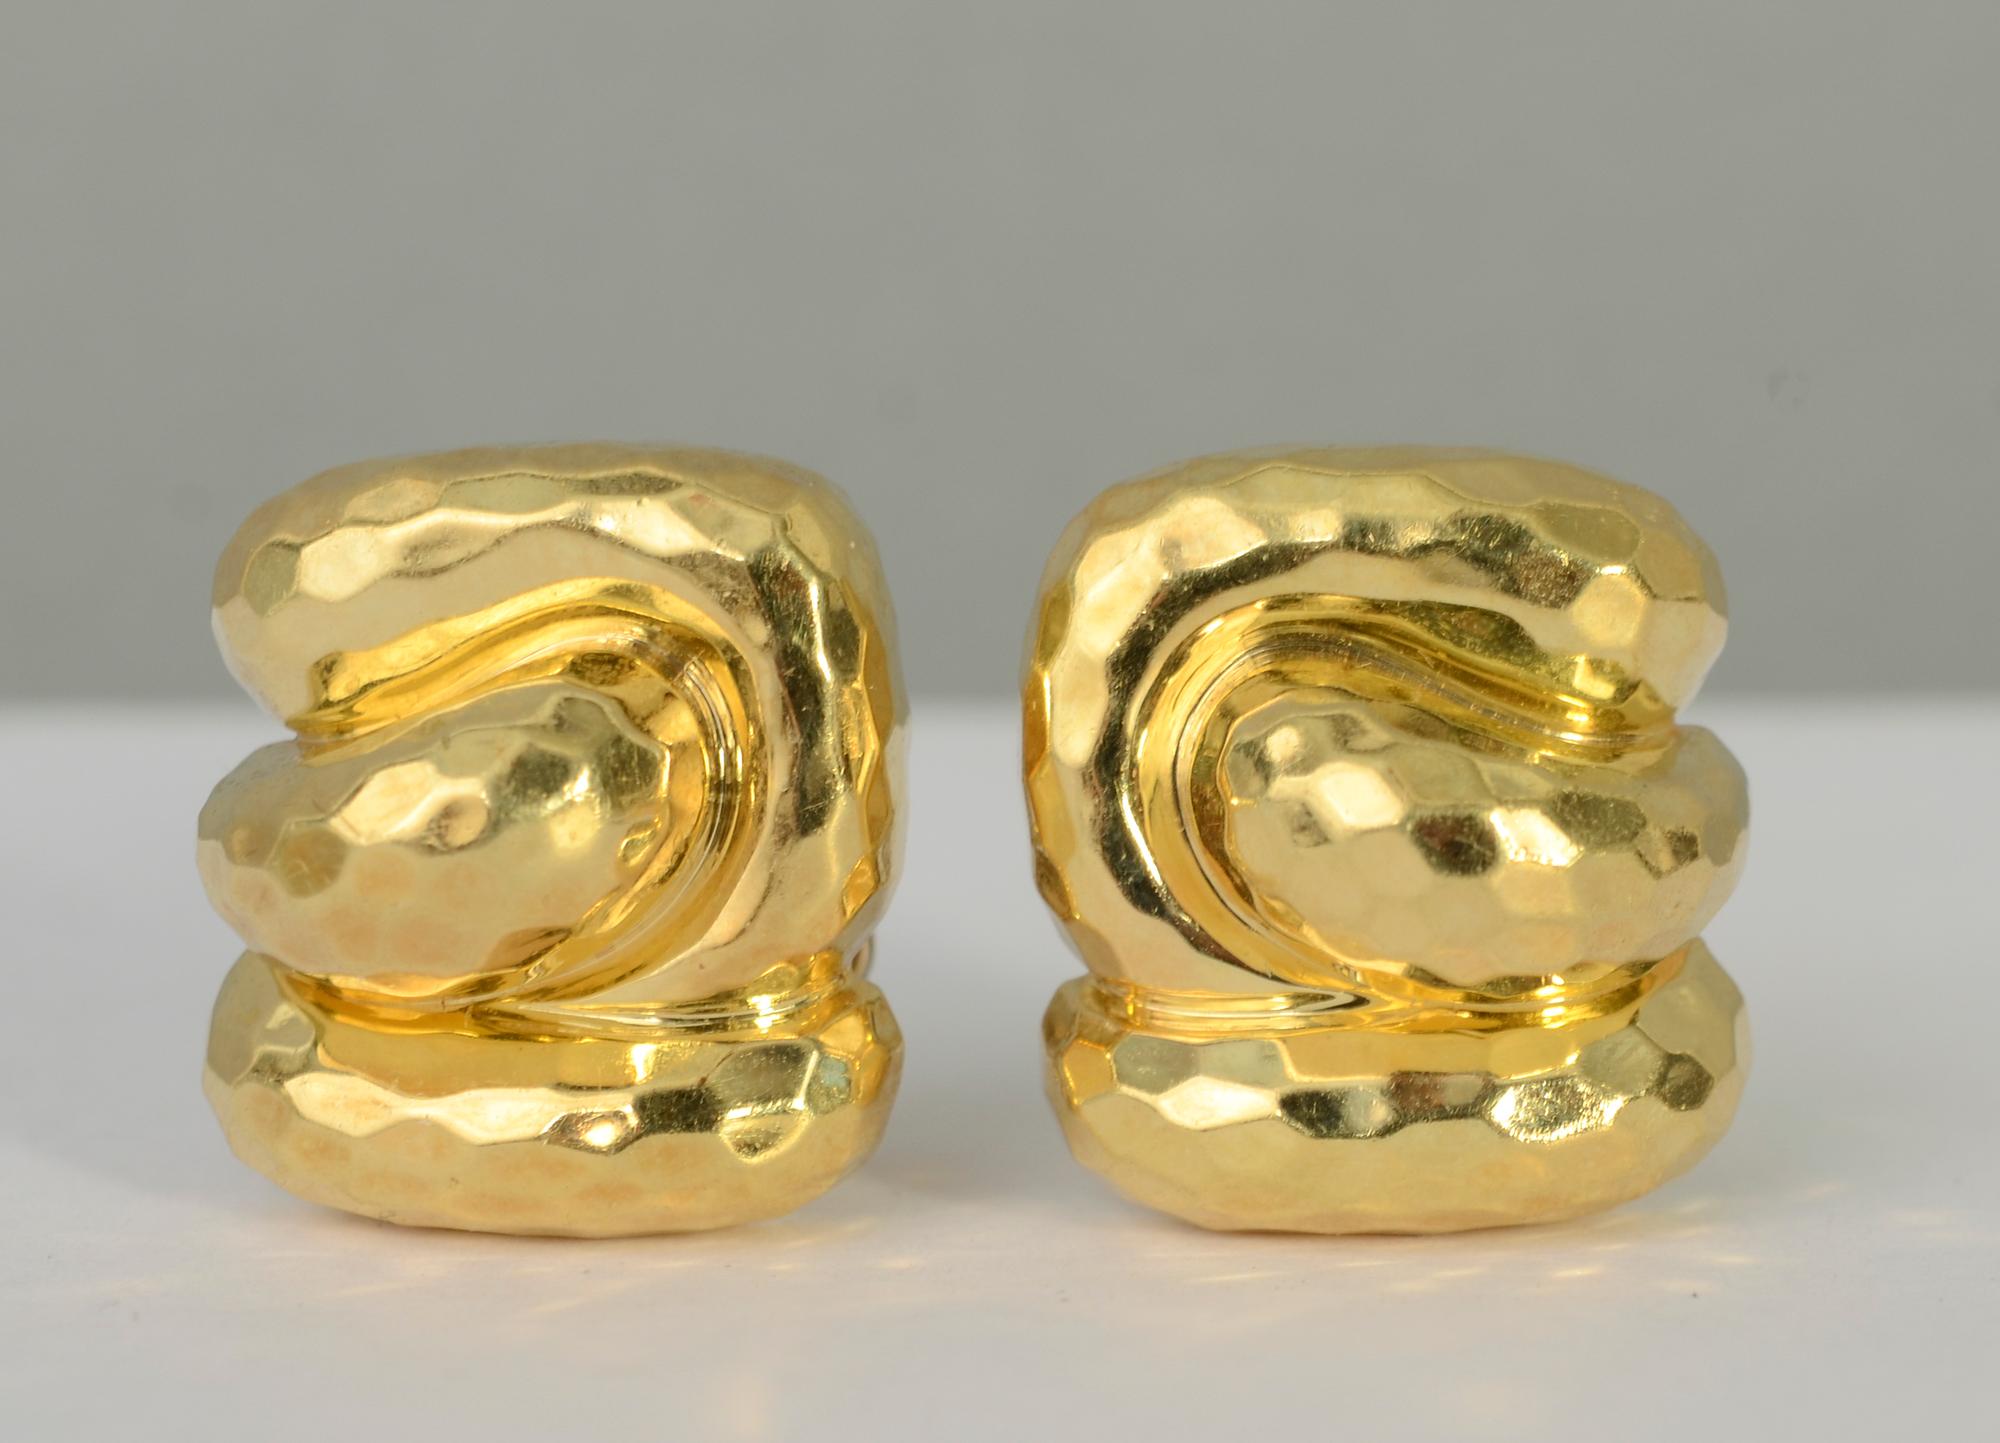 Tailored and chic gold earrings by Henry Dunay. They are made with the hammered gold finish for which he is well known. The earrings have a terrific abstract sculptural design. Backs are clips and posts.